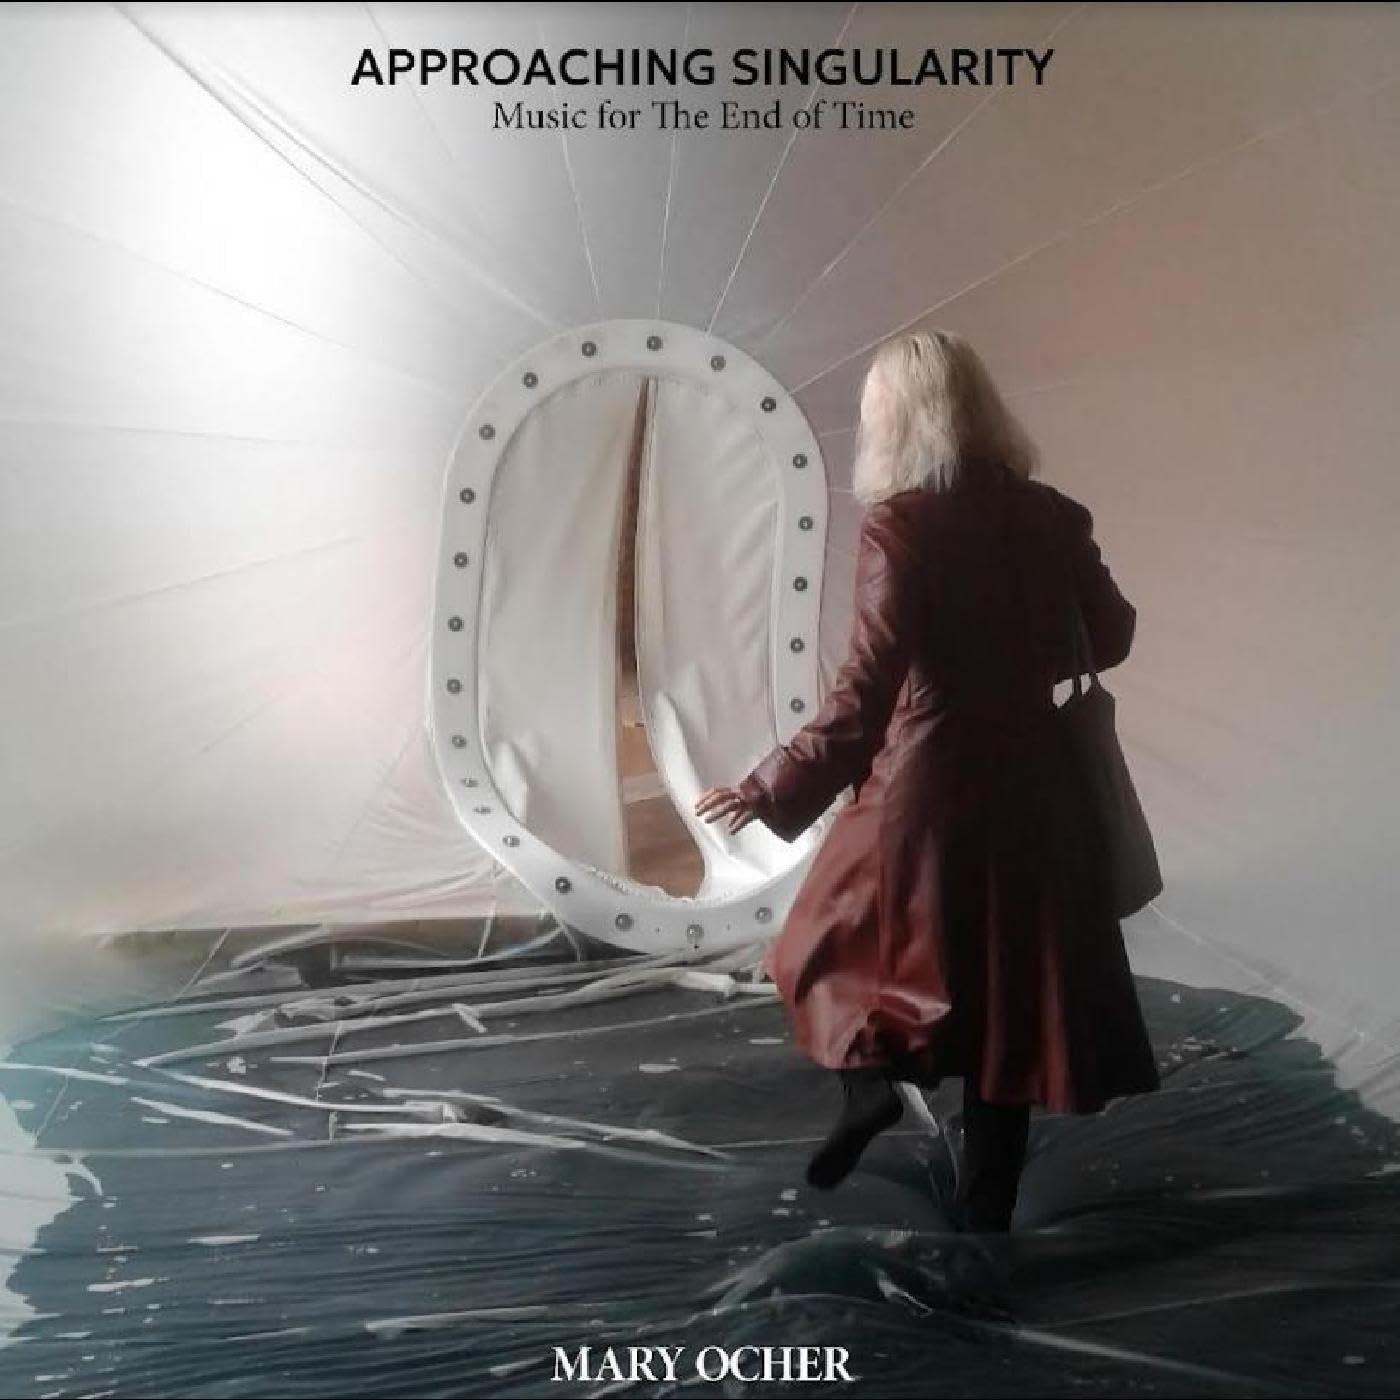 Vinile Mary Ocher - Approaching Singularity: Music For The End Of Time NUOVO SIGILLATO SUBITO DISPONIBILE